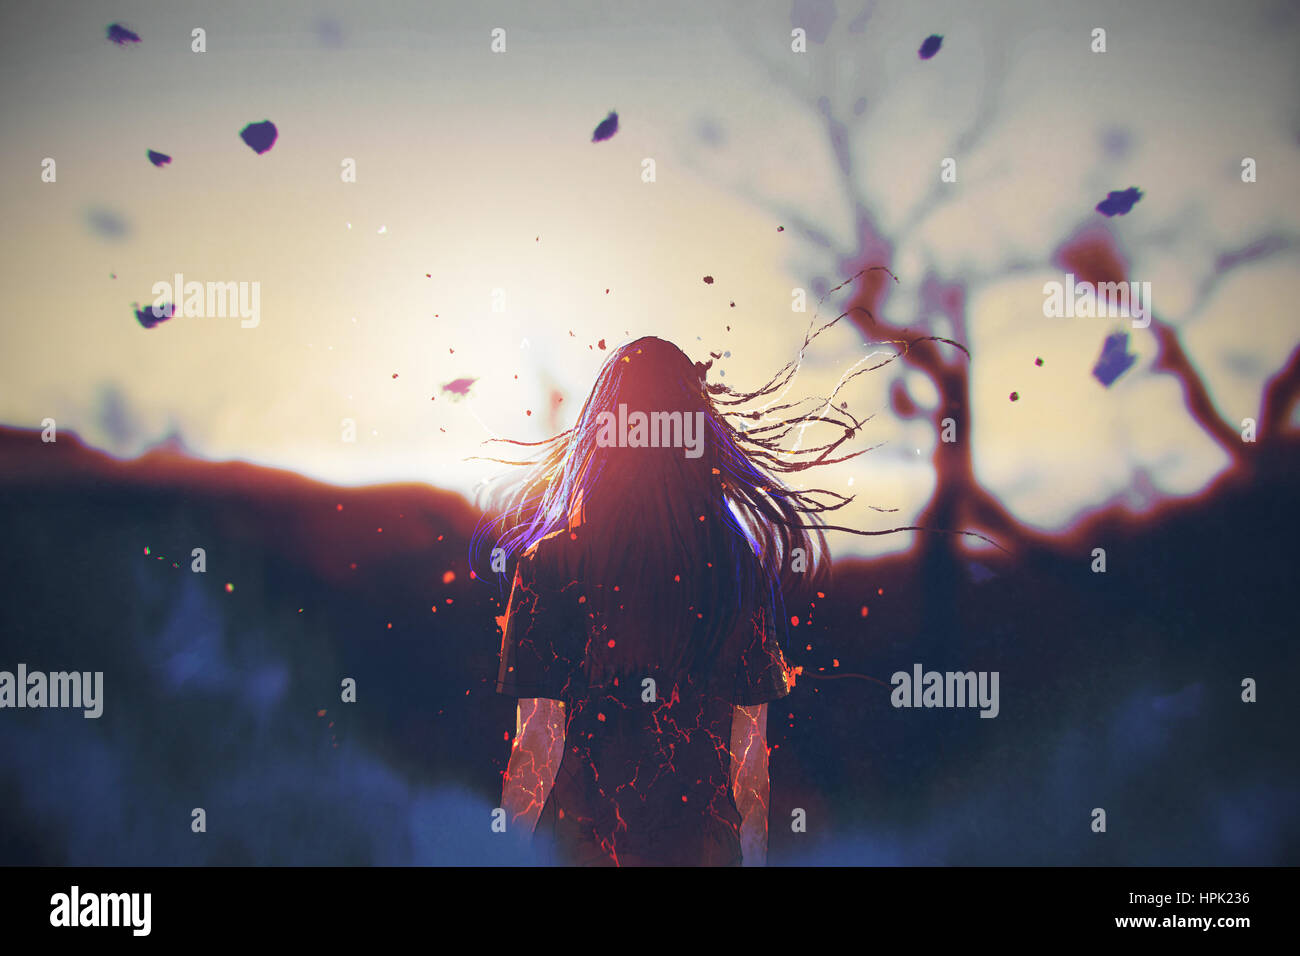 rear view of woman with cracked effect on her body looking the sunrise,illustration painting Stock Photo